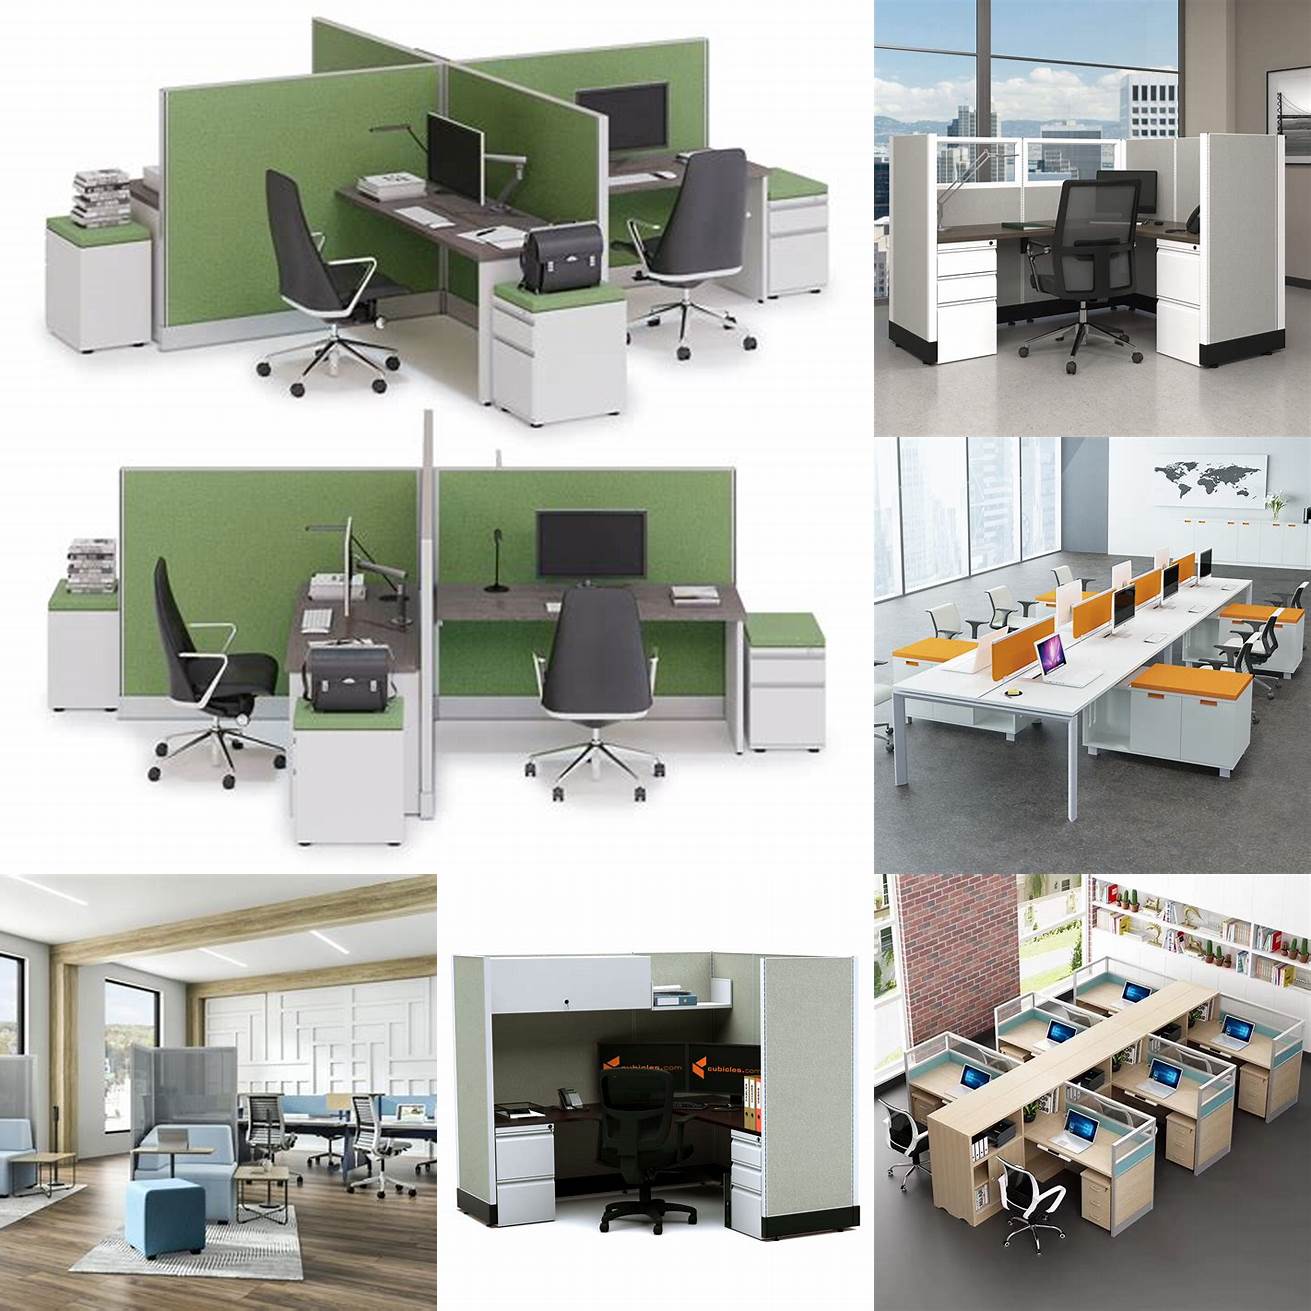 Modular office furniture in action